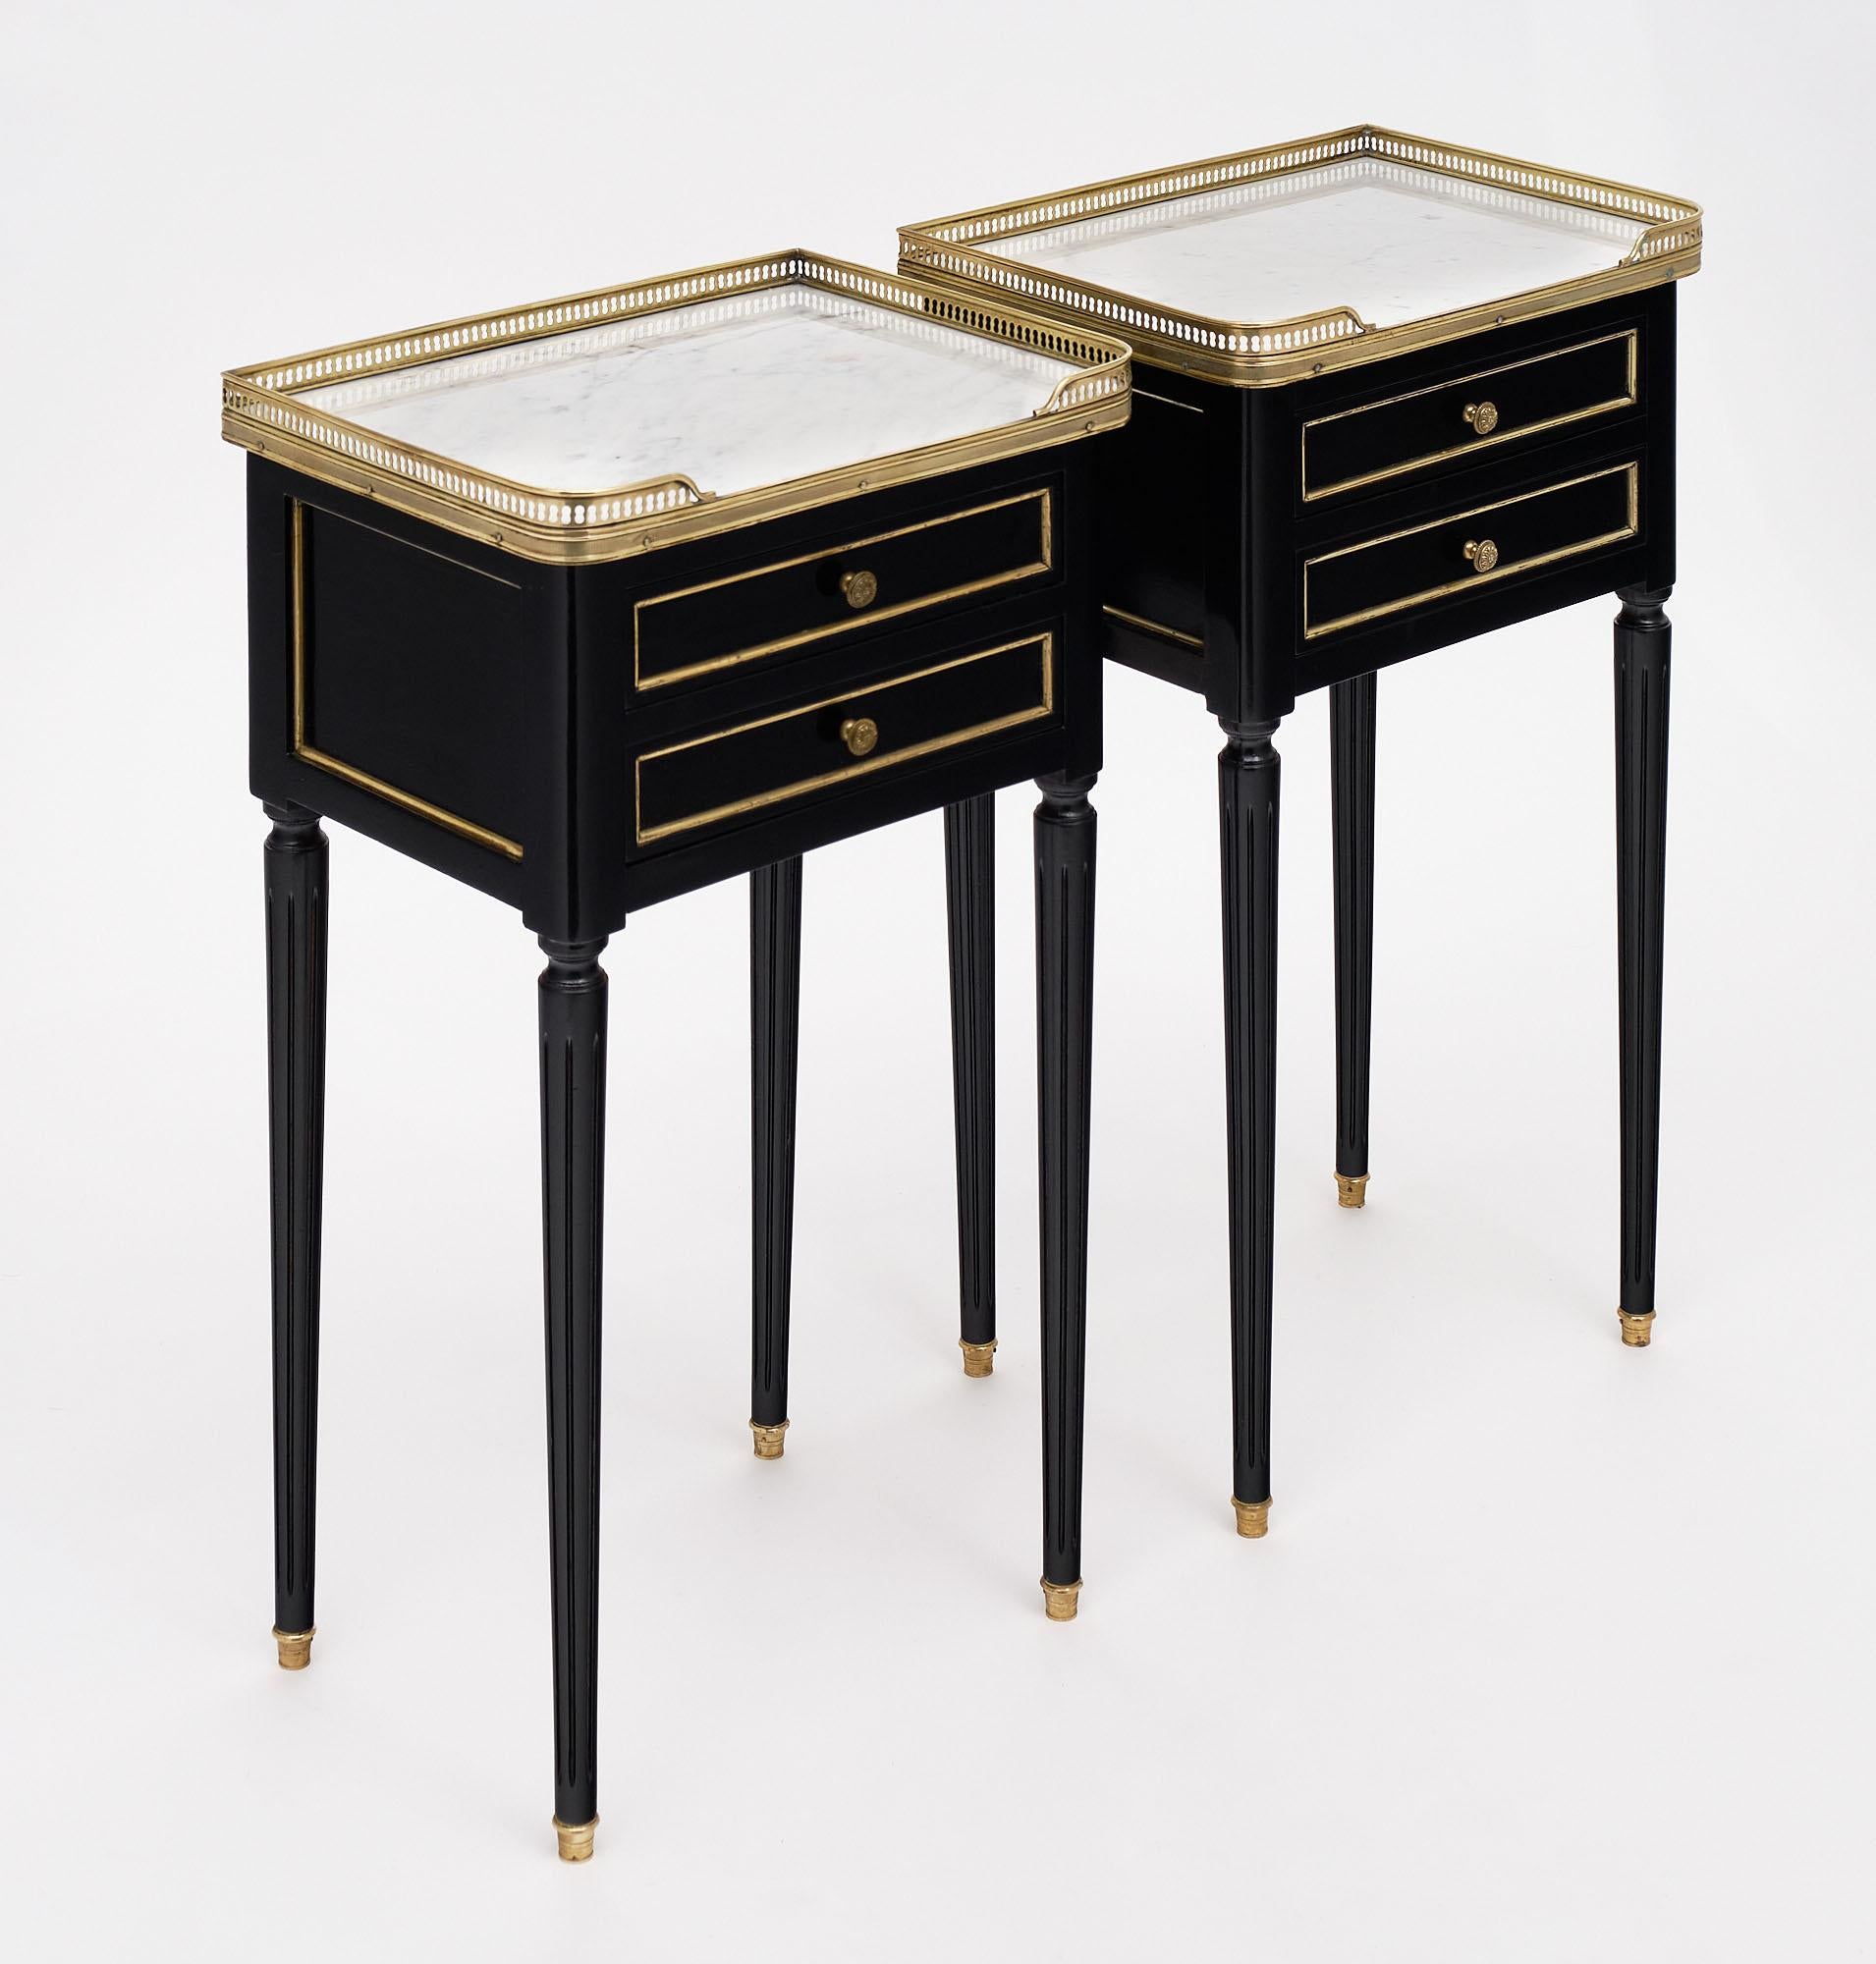 Pair of side tables, French, in the Louis XVI style with intact Carrara marble tops and opened gilt brass galleries. Each features two dovetailed drawers and fluted, tapered legs. The gilt brass trim throughout contrasts beautifully with the